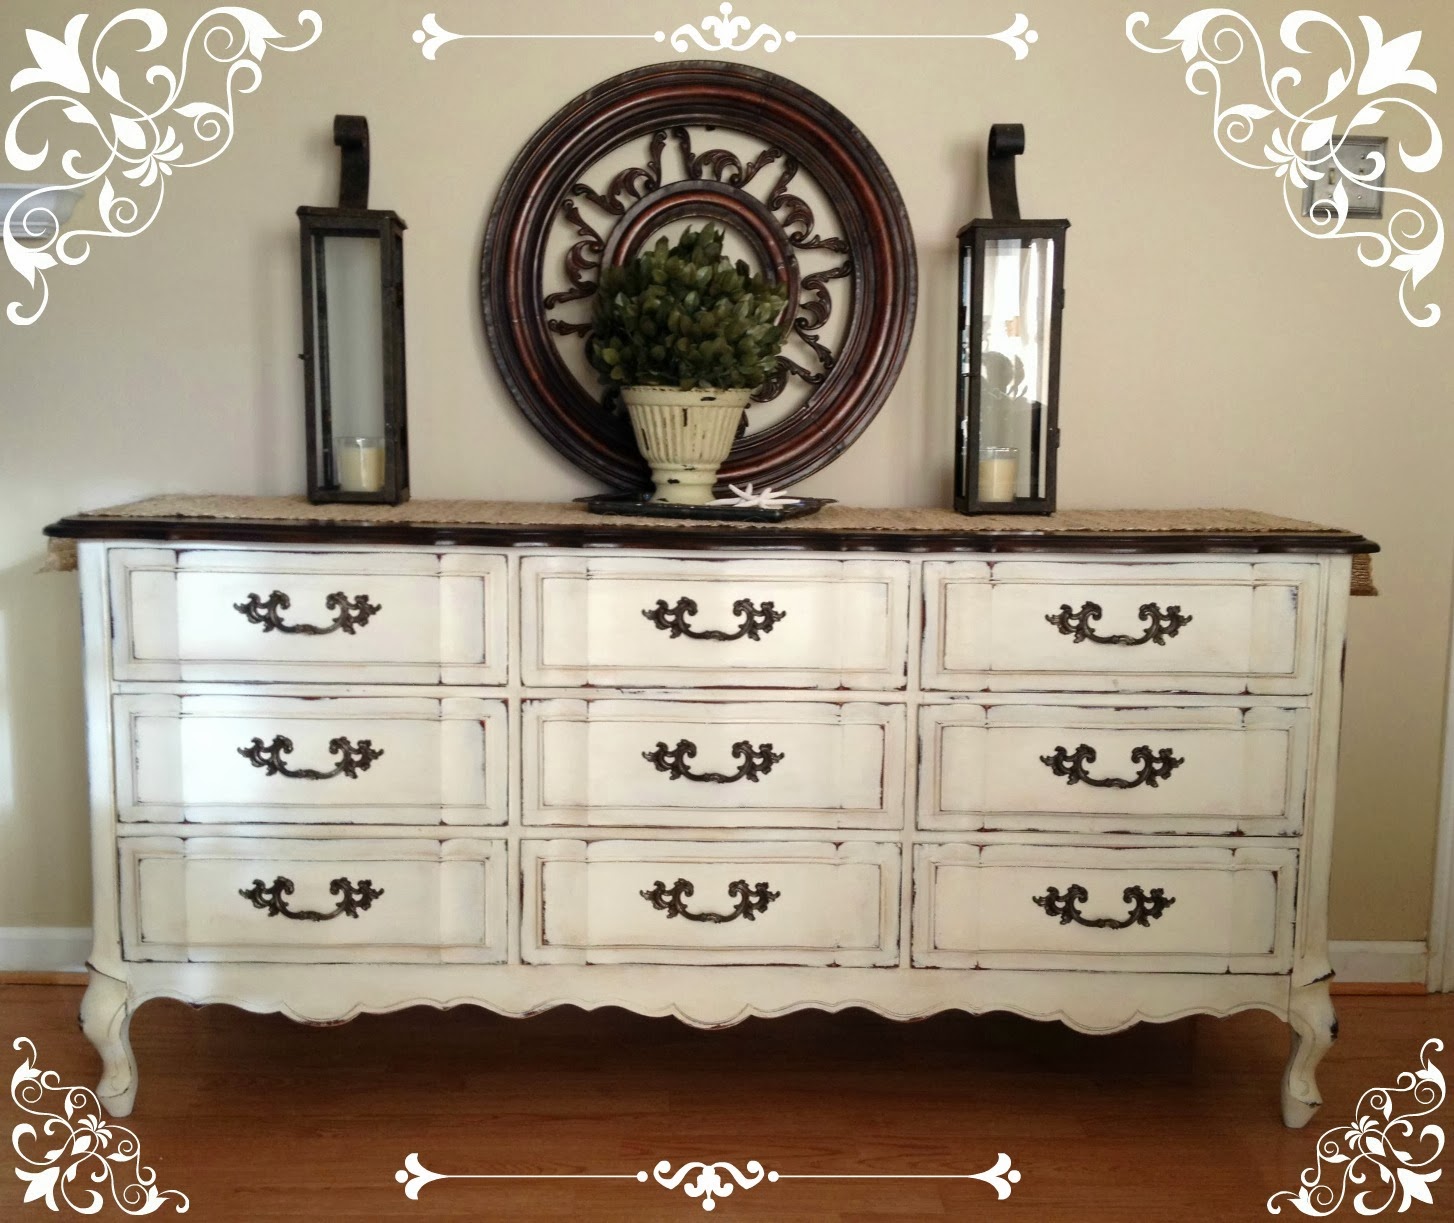 Vintage Country Style: Get Inspired! Before & After Chalk Paint!